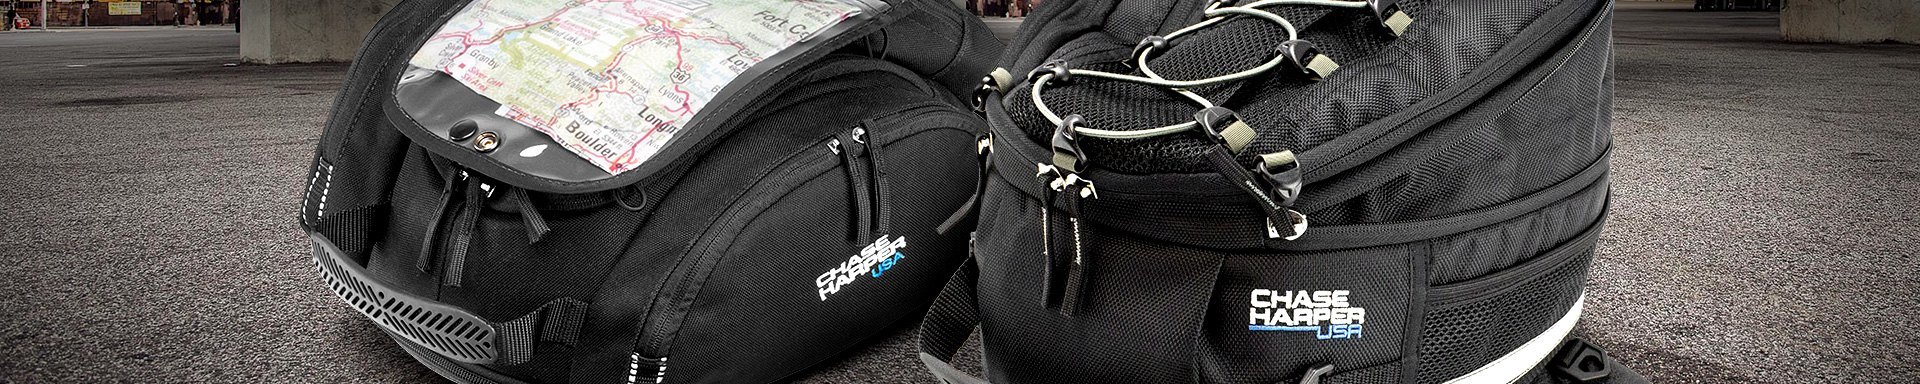 Chase Harper Rider Bags